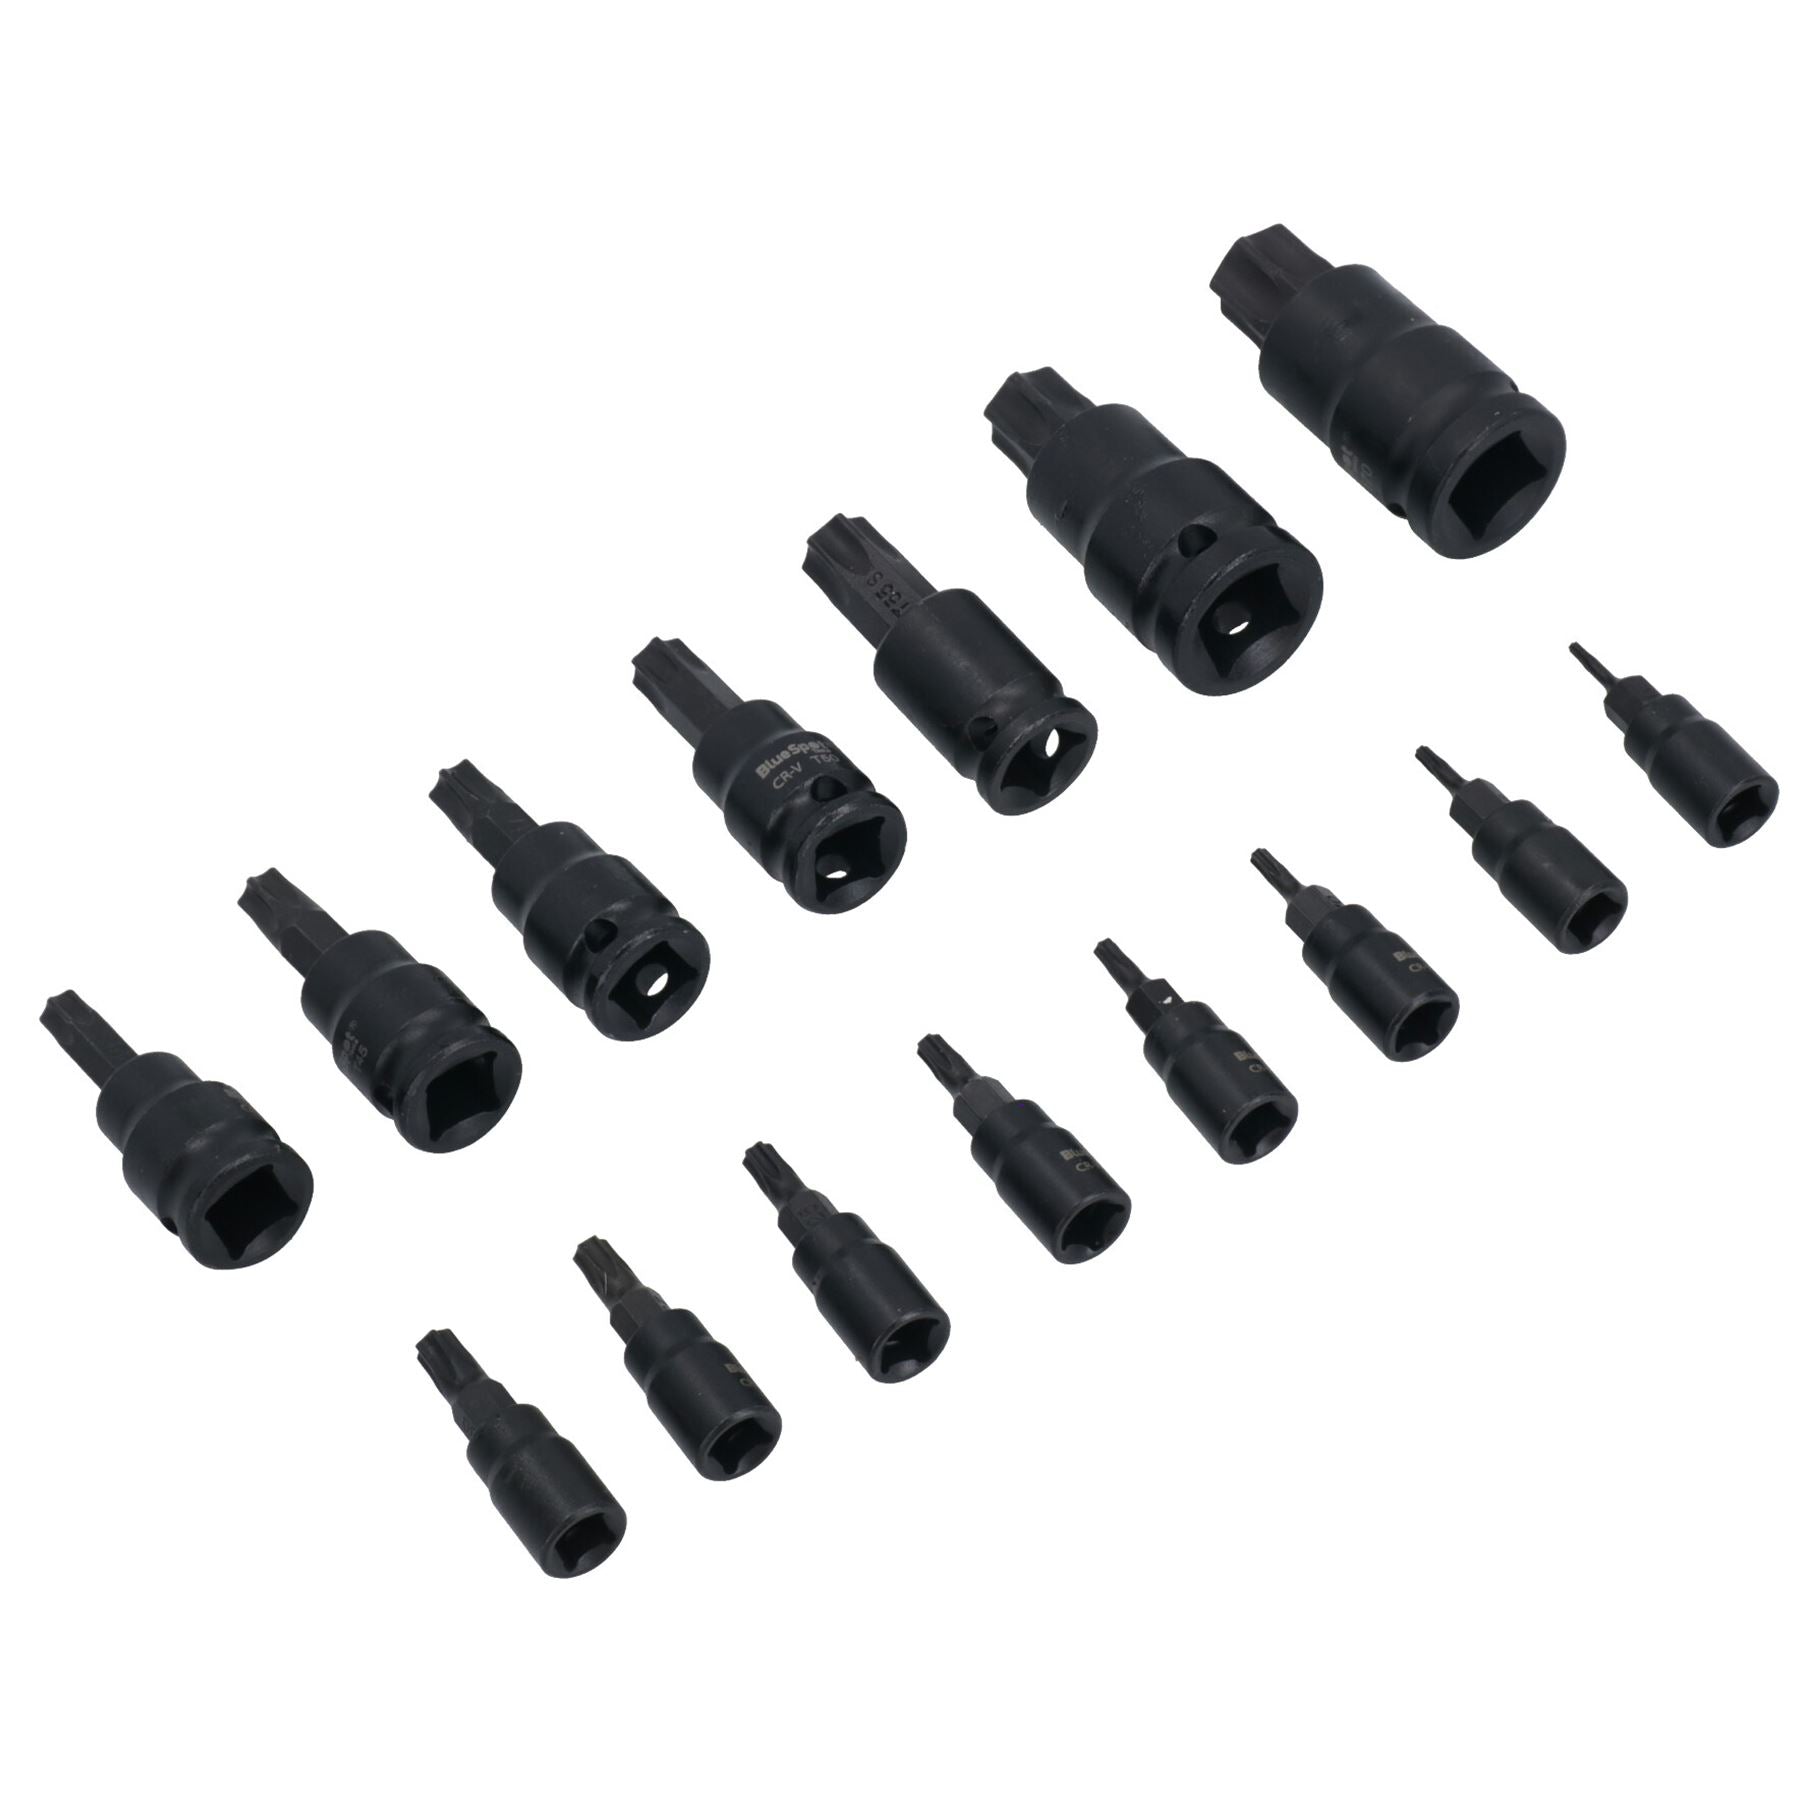 Impact Impacted Torx Star Bit Sockets 1/4in 3/8in and 1/2in Drive T6 – T70 15pc